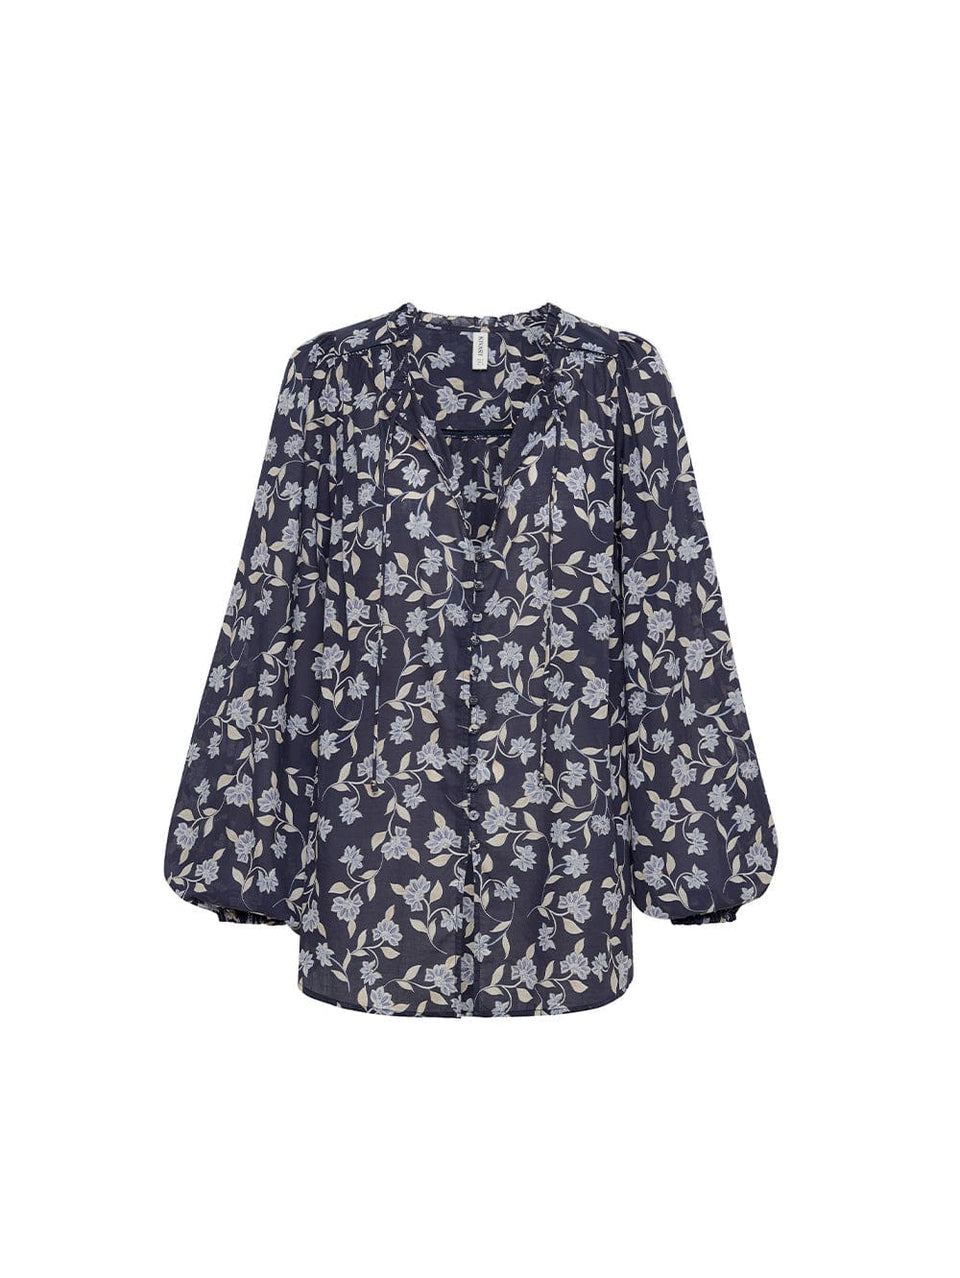 Ghost image of KIVARI Jeanne Blouse: A navy and sky blue floral blouse made from cotton and featuring a button front, full-length blouson sleeves and frill collar detail.